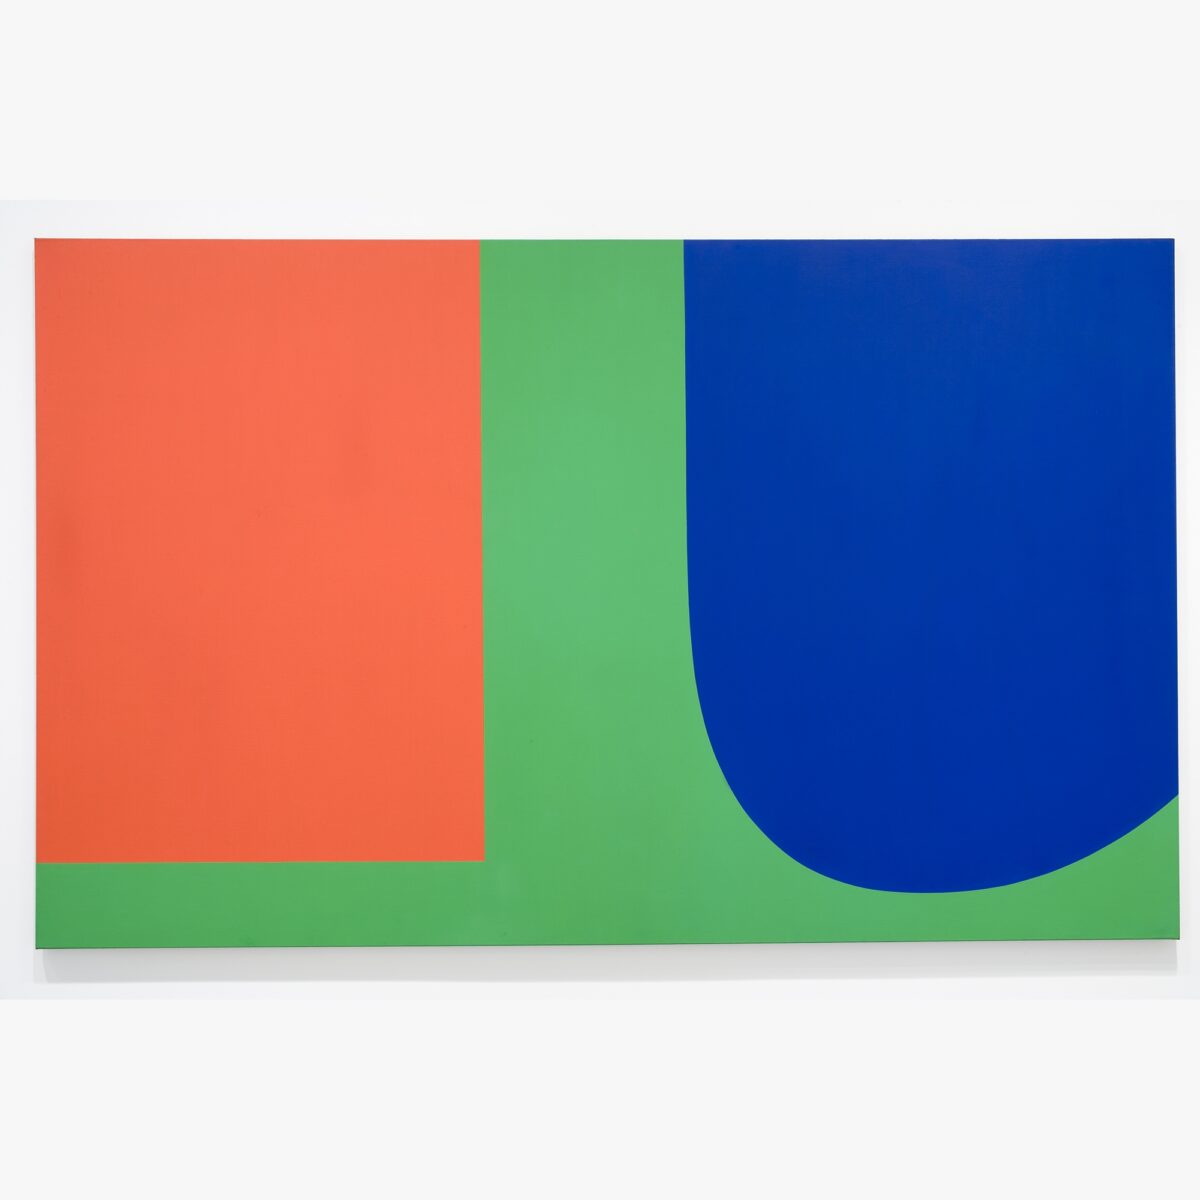 Ellsworth Kelly: Red Green Blue paint on canvas.